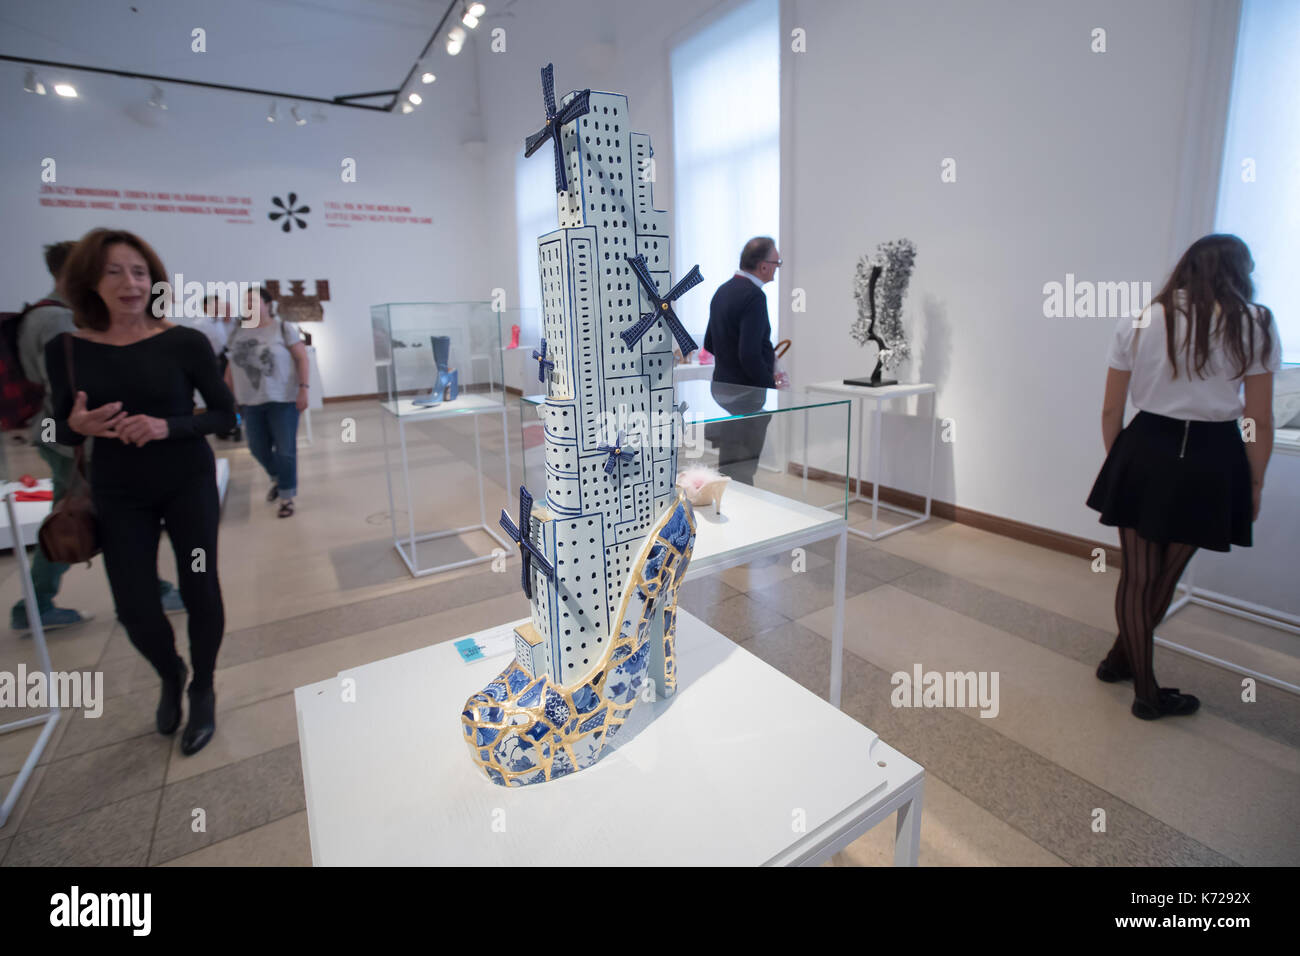 Budapest, Hungary. 14th Sep, 2017. Artwork 'Home' by Dutch designer Joyce de Gruiter is seen on display at the media preview of Shoe Magic experimental shoe design exhibition in Budapest, Hungary on Sept. 14, 2017. The exhibits belong to the Hague Virtual Shoe Museum. Credit: Attila Volgyi/Xinhua/Alamy Live News Stock Photo